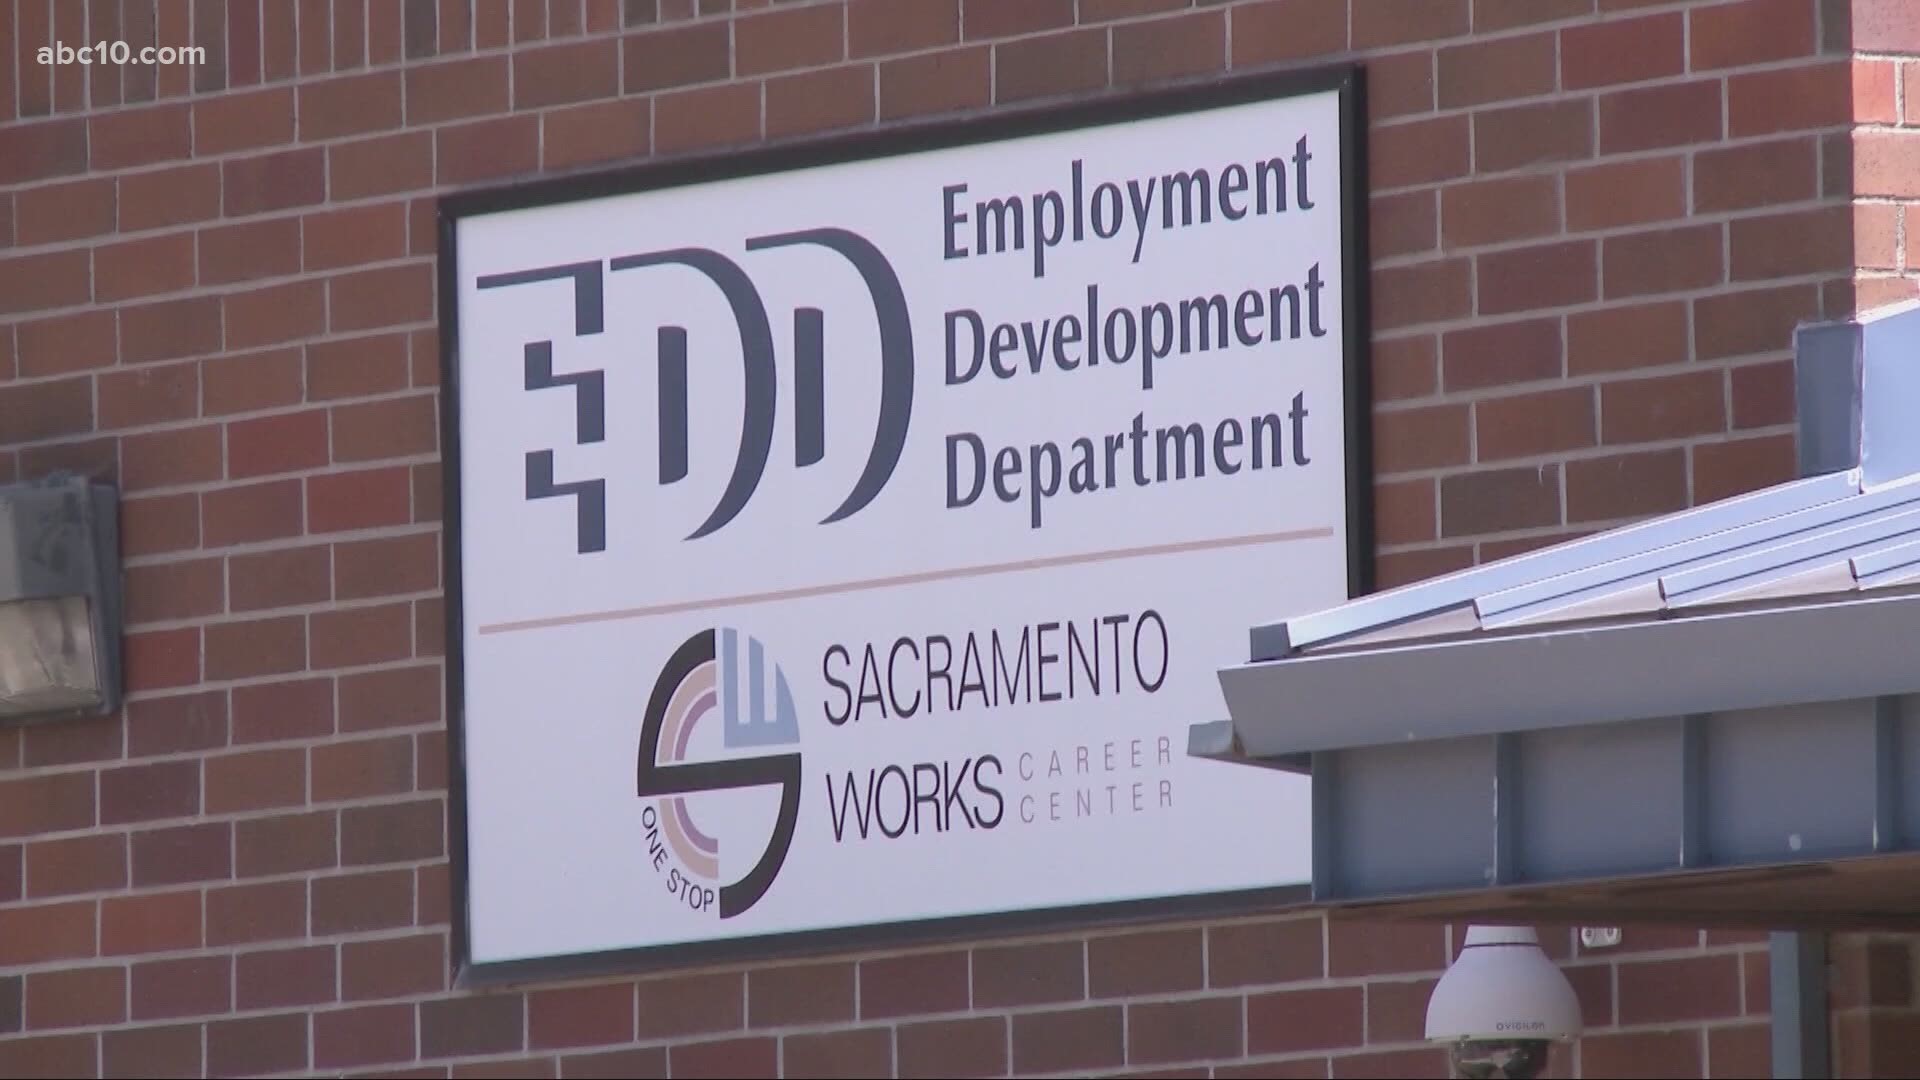 According to Gov. Newsom's office, EDD plans to eliminate the backload by prioritizing the older unemployment claims by Sept.